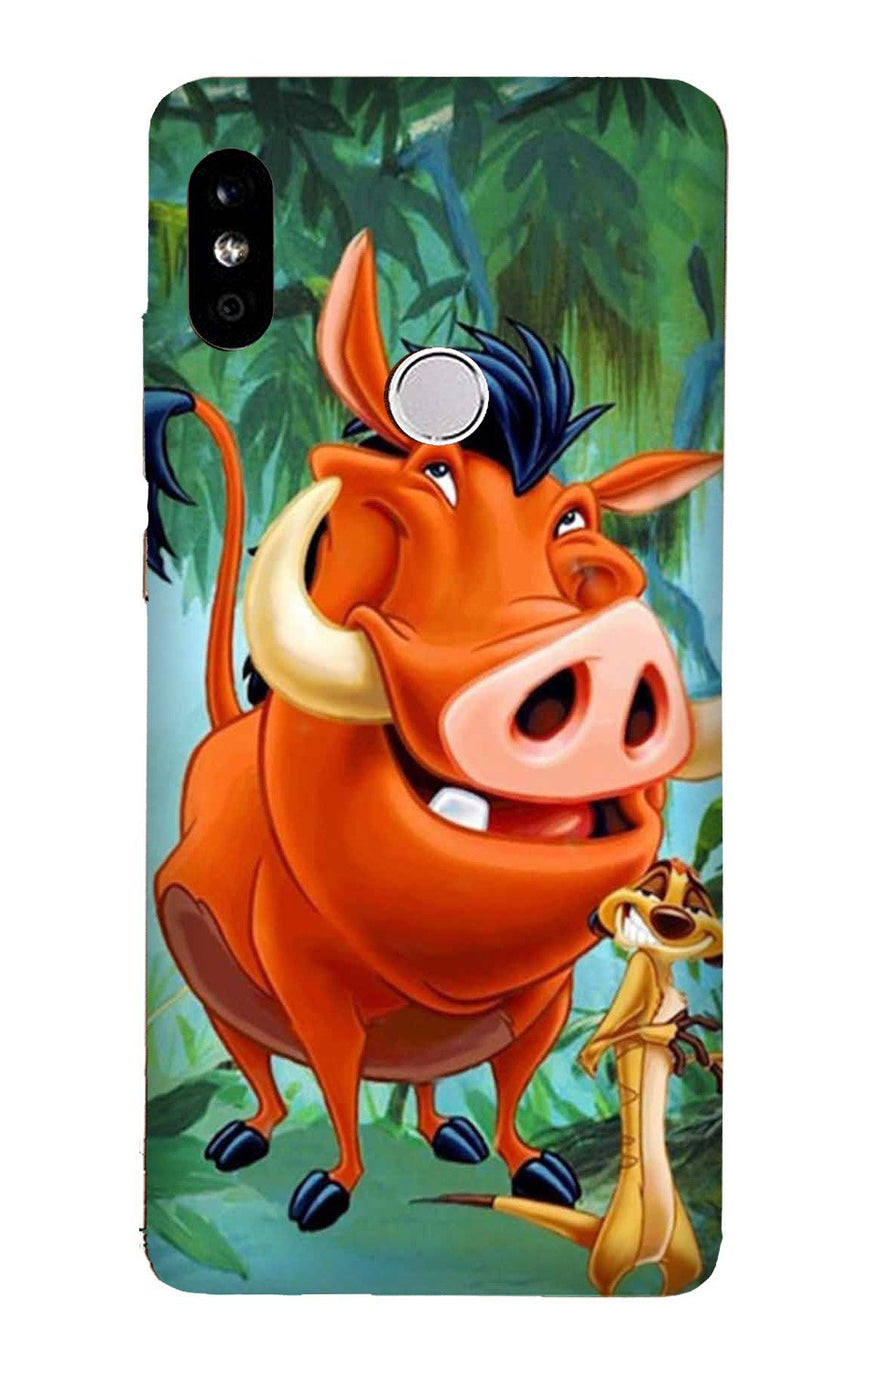 Timon and Pumbaa Mobile Back Case for Redmi 6 Pro  (Design - 305)